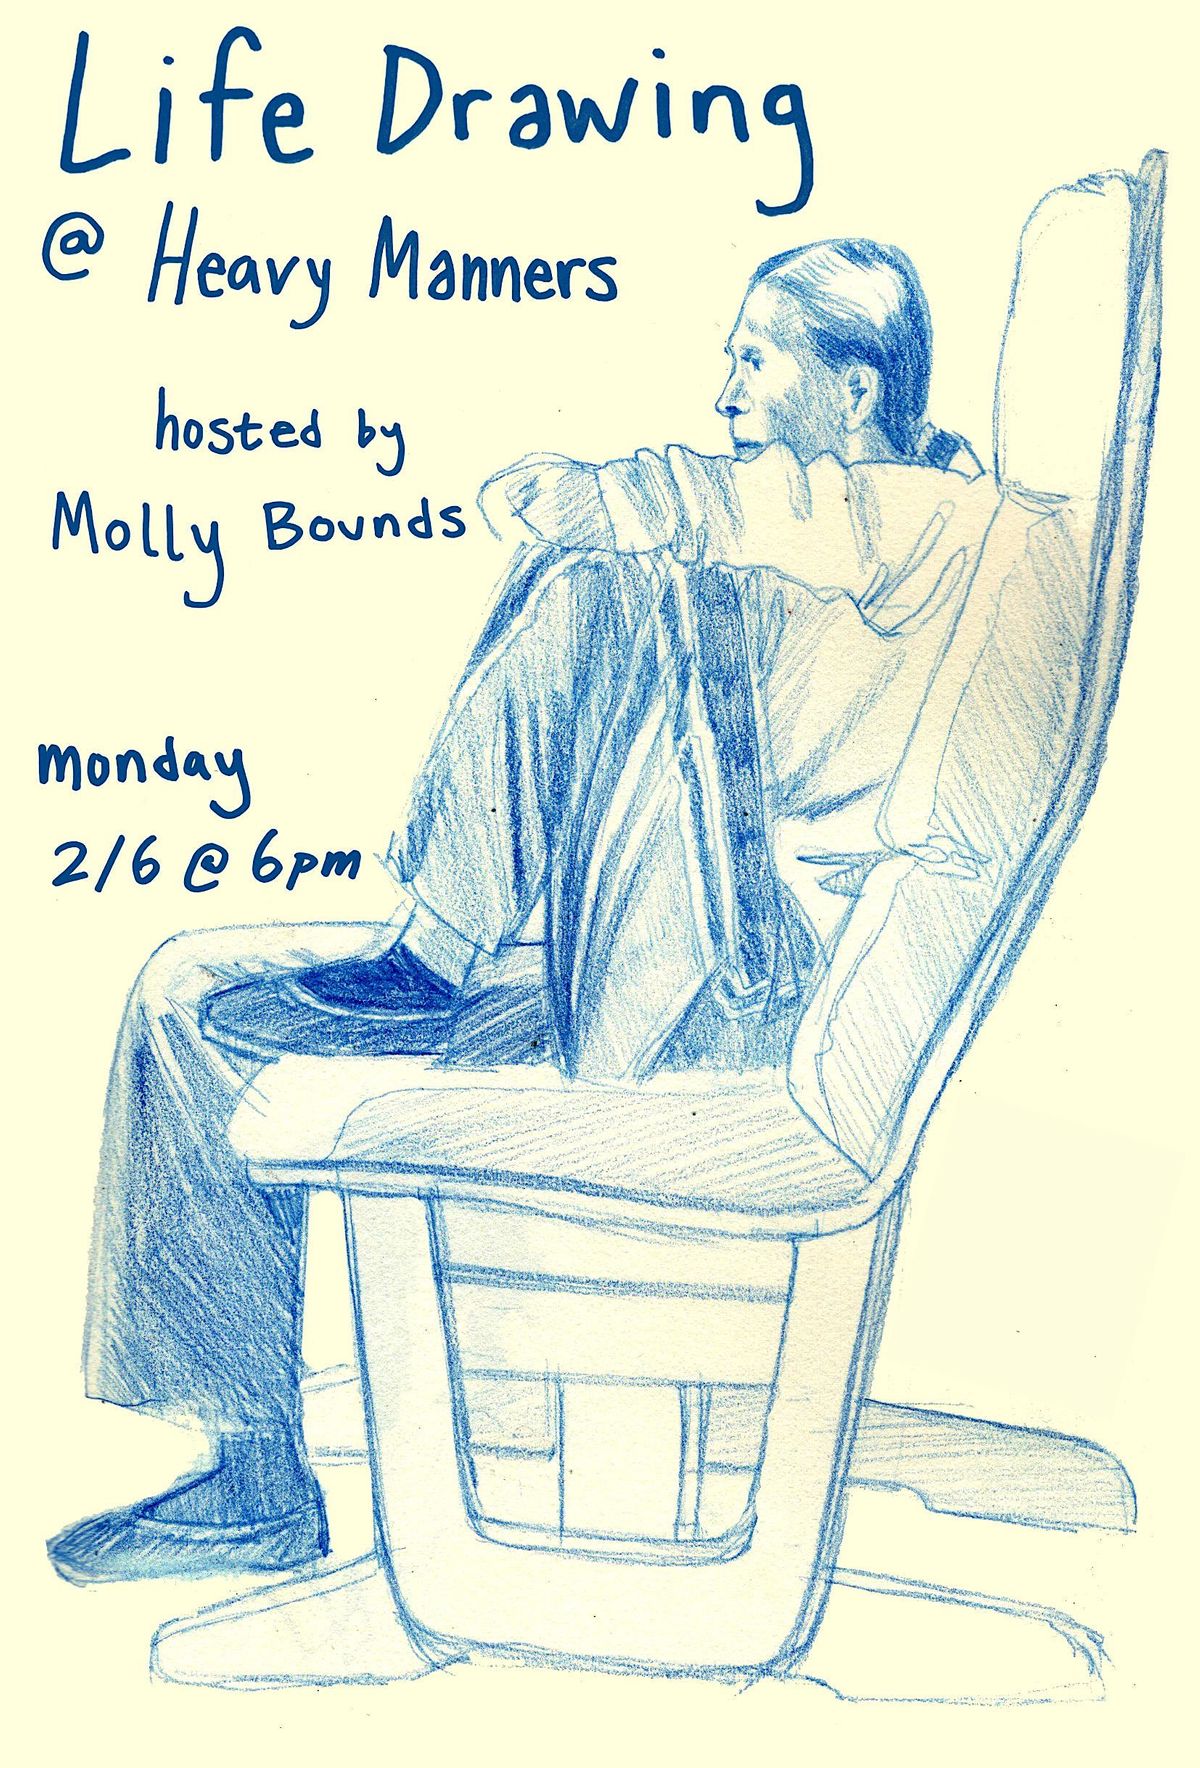 Life Drawing at Heavy Manners Hosted by Molly Bounds (2\/6)